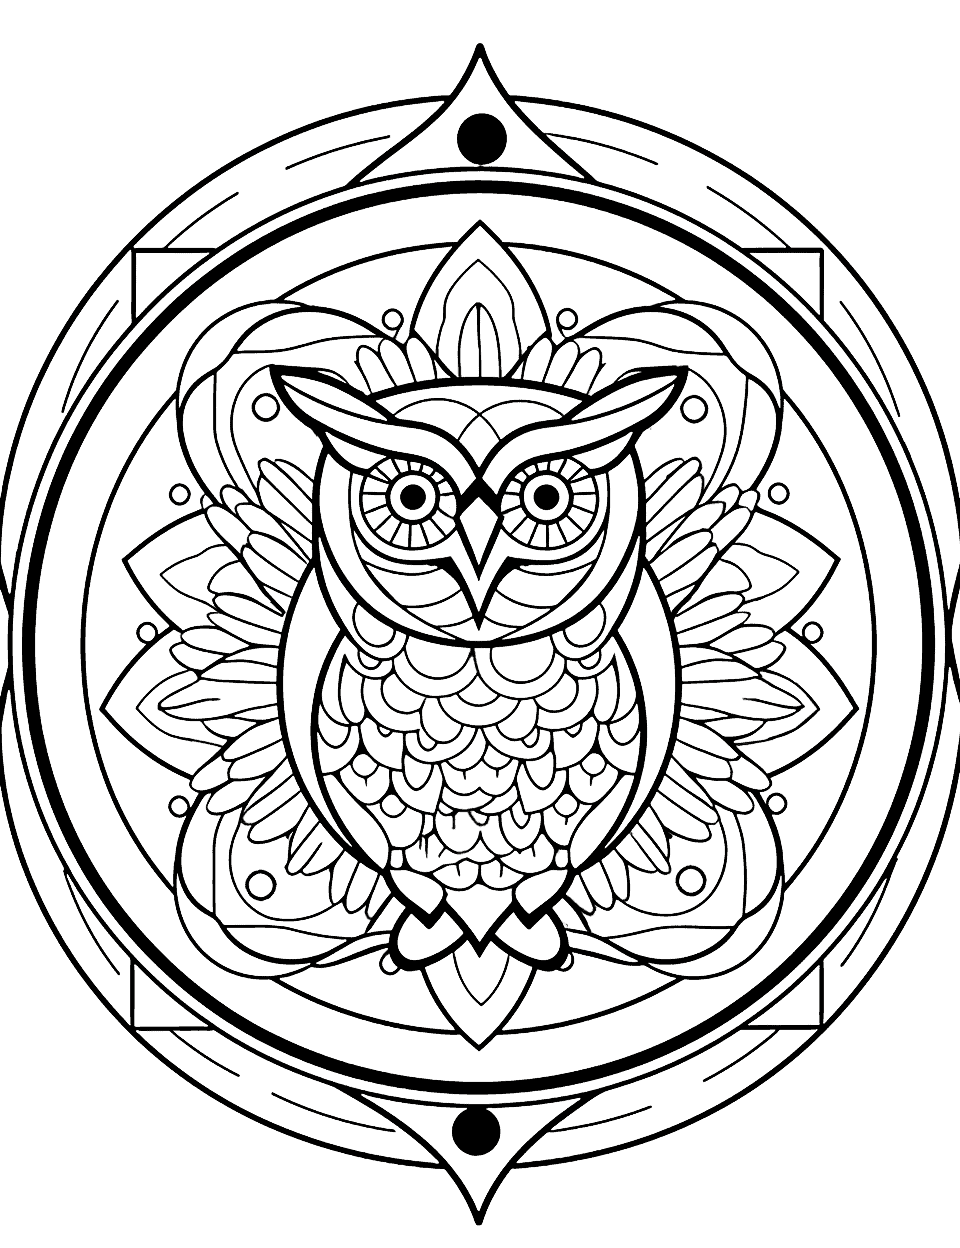 Enchanted Owls Mandala Coloring Page - A detailed, night-themed mandala featuring an owl perched on a branch with the moonlight radiating behind.